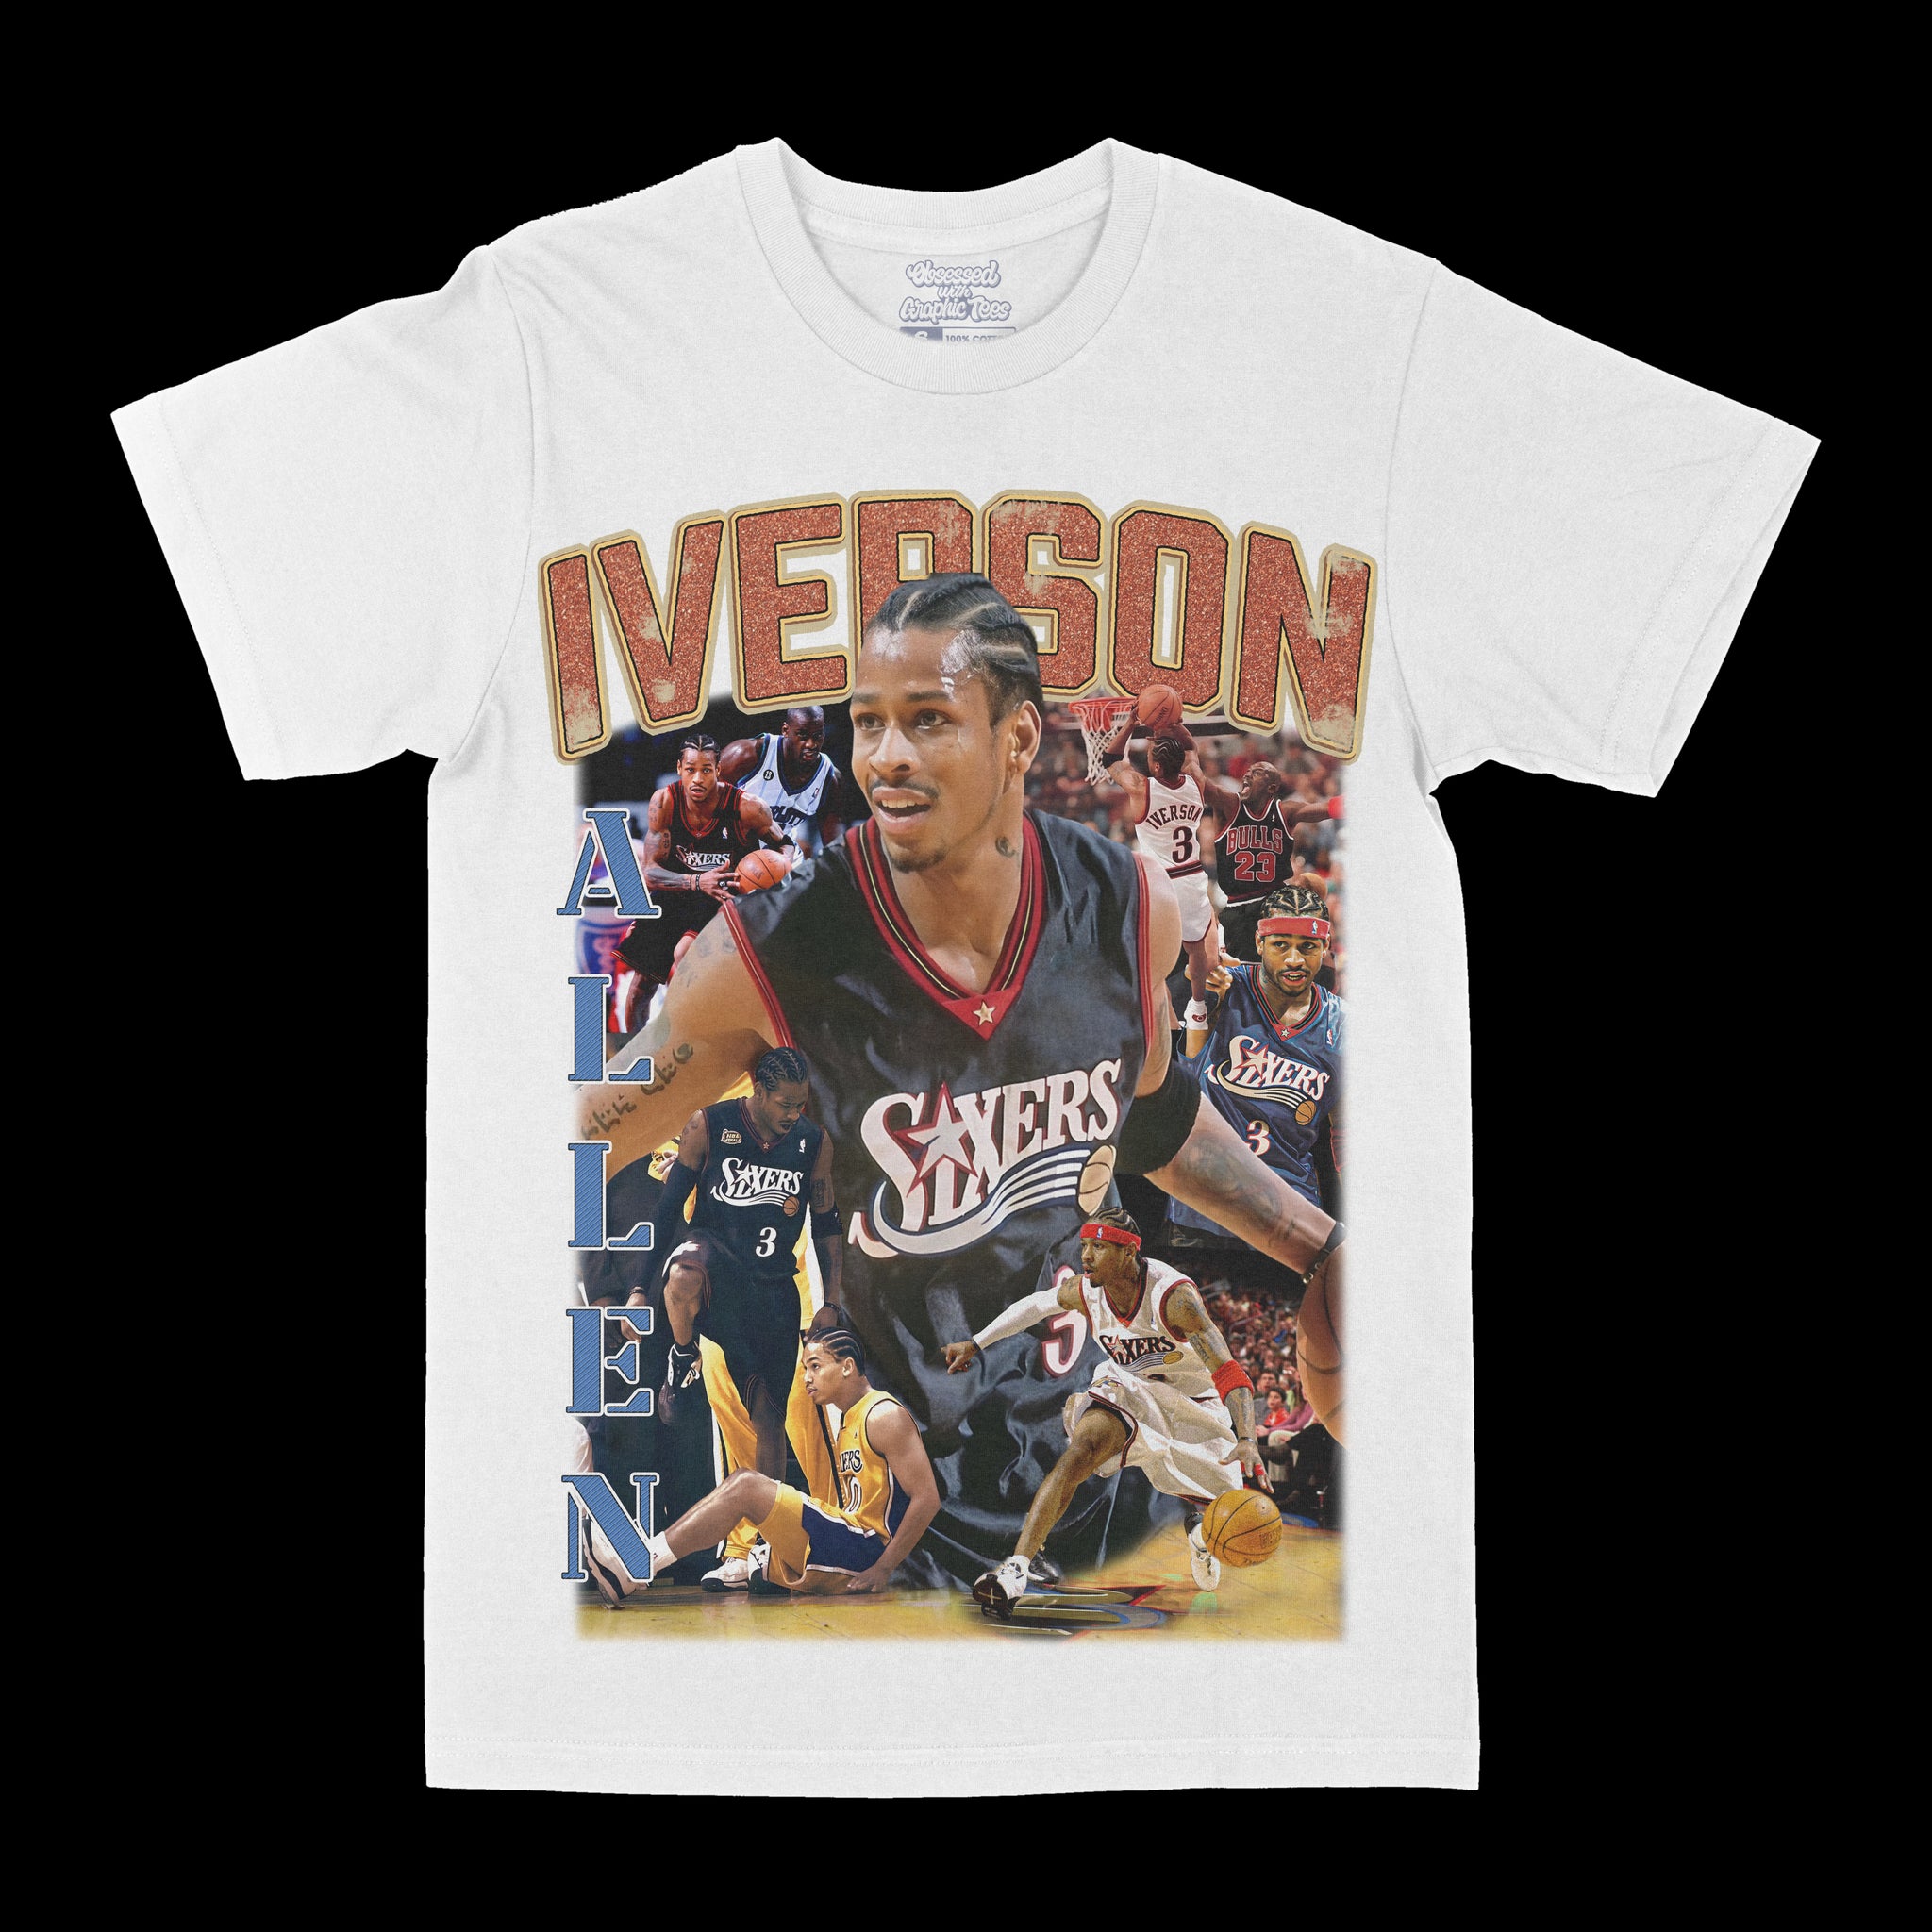 Allen Iverson "Step Over" Graphic Tee